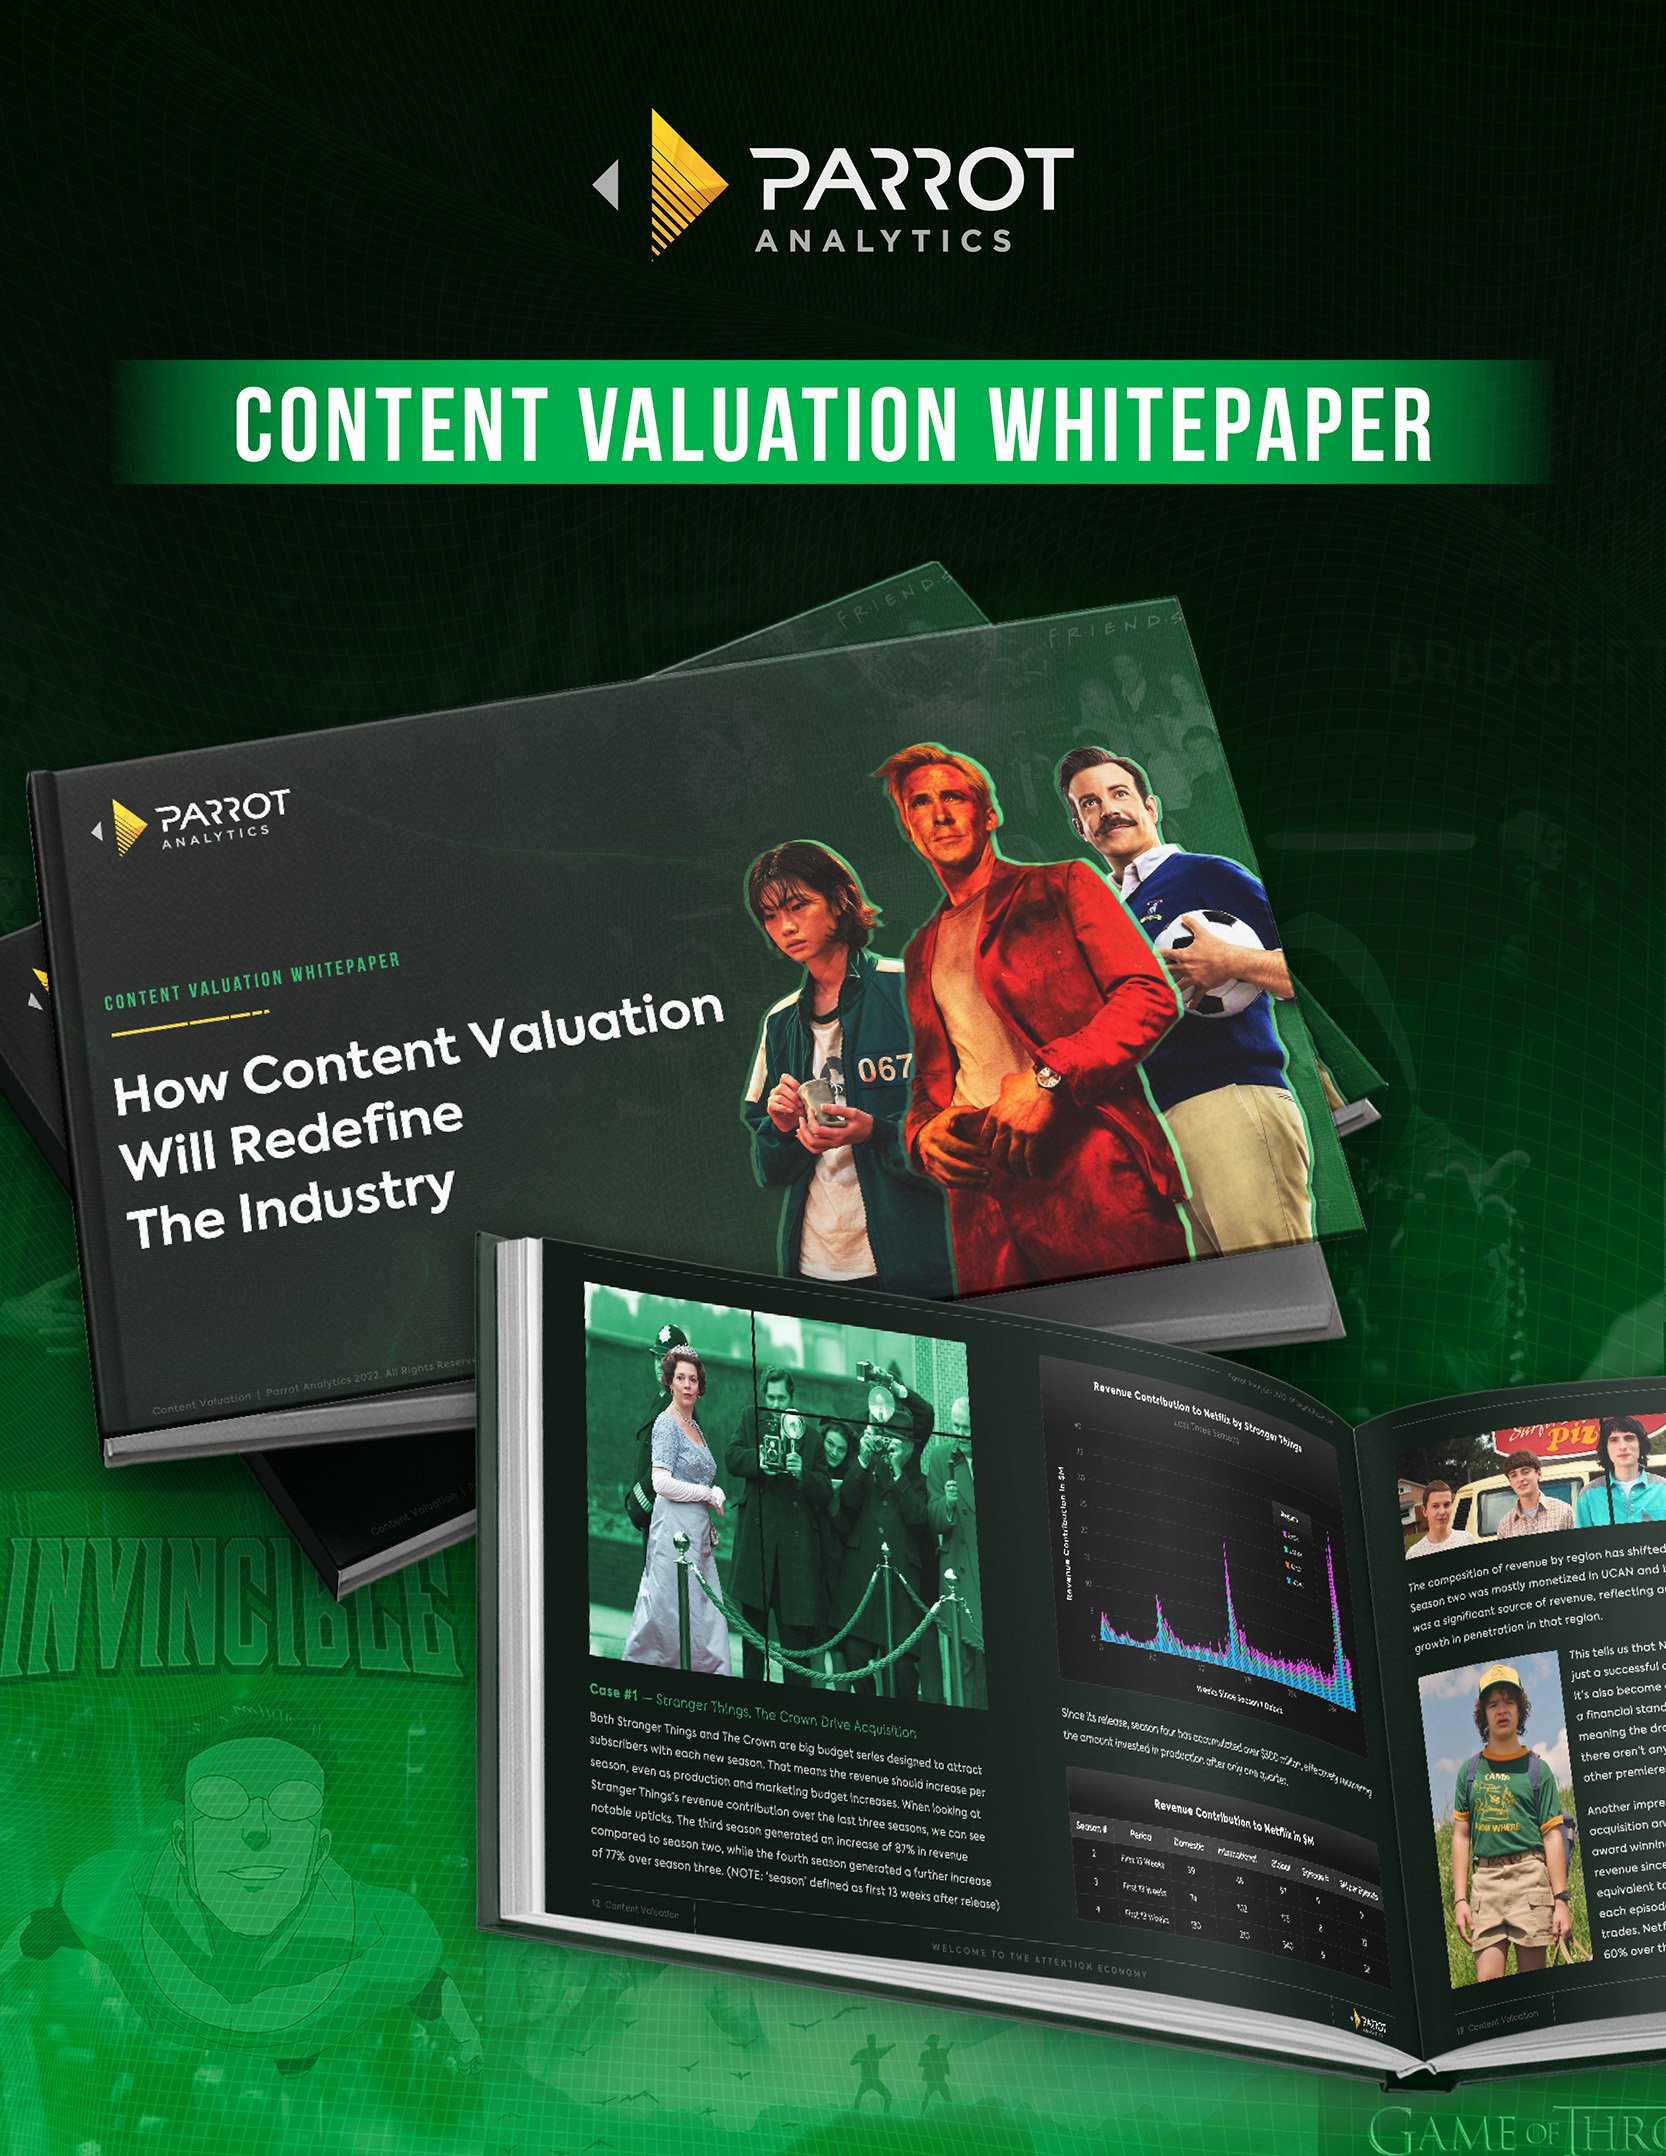 The Parrot Analytics Content Valuation Whitepaper 2022: How Content Valuation Will Redefine The Industry